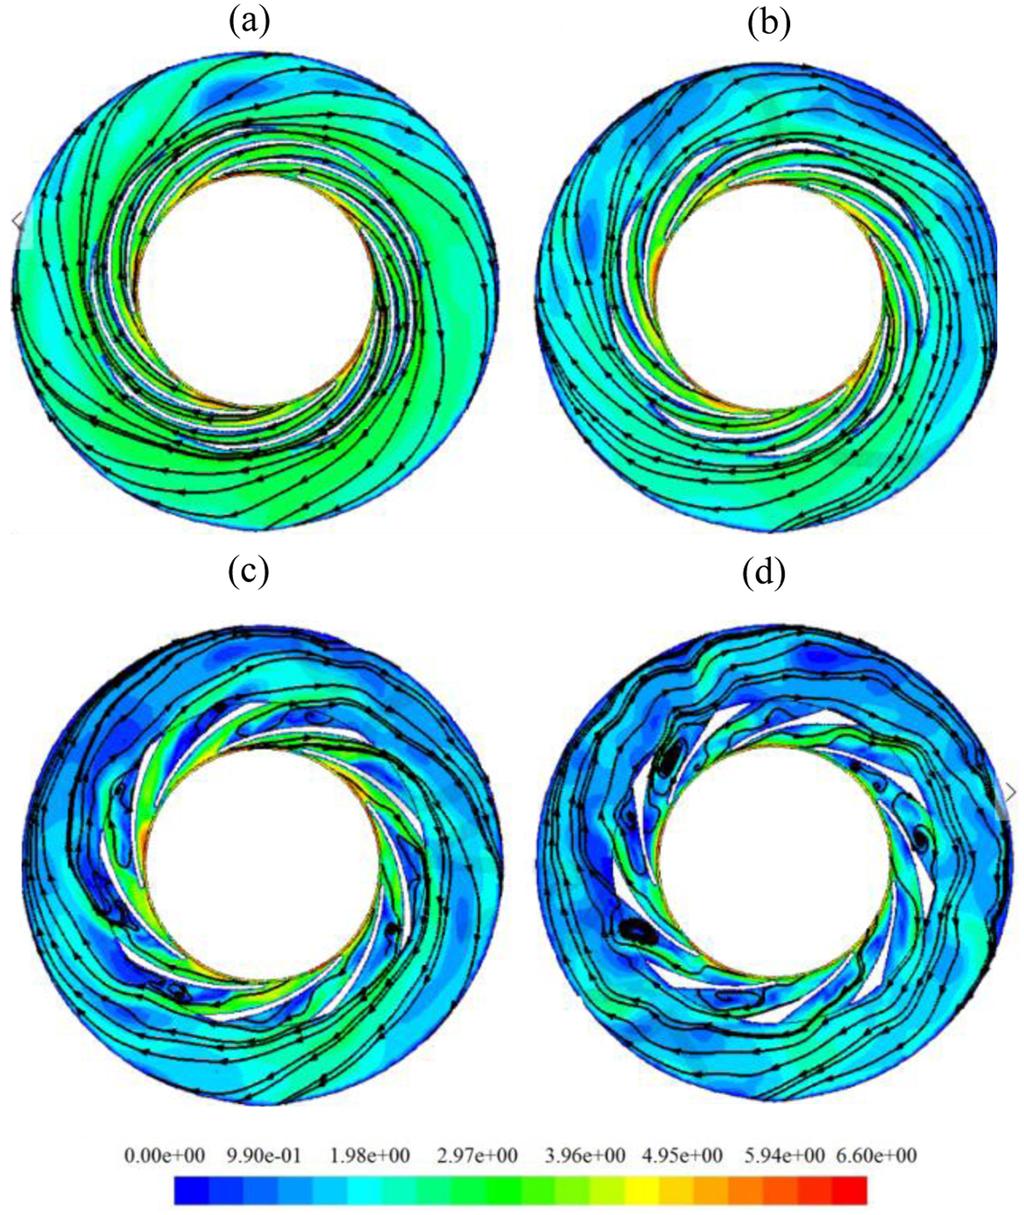 8 Advances in Mechanical Engineering Figure 10. Velocity contours and streamlines (m/s): (a) b4 = 5, (b) b4 = 10, (c) b4 = 15, and (d) b4 = 20. pump.